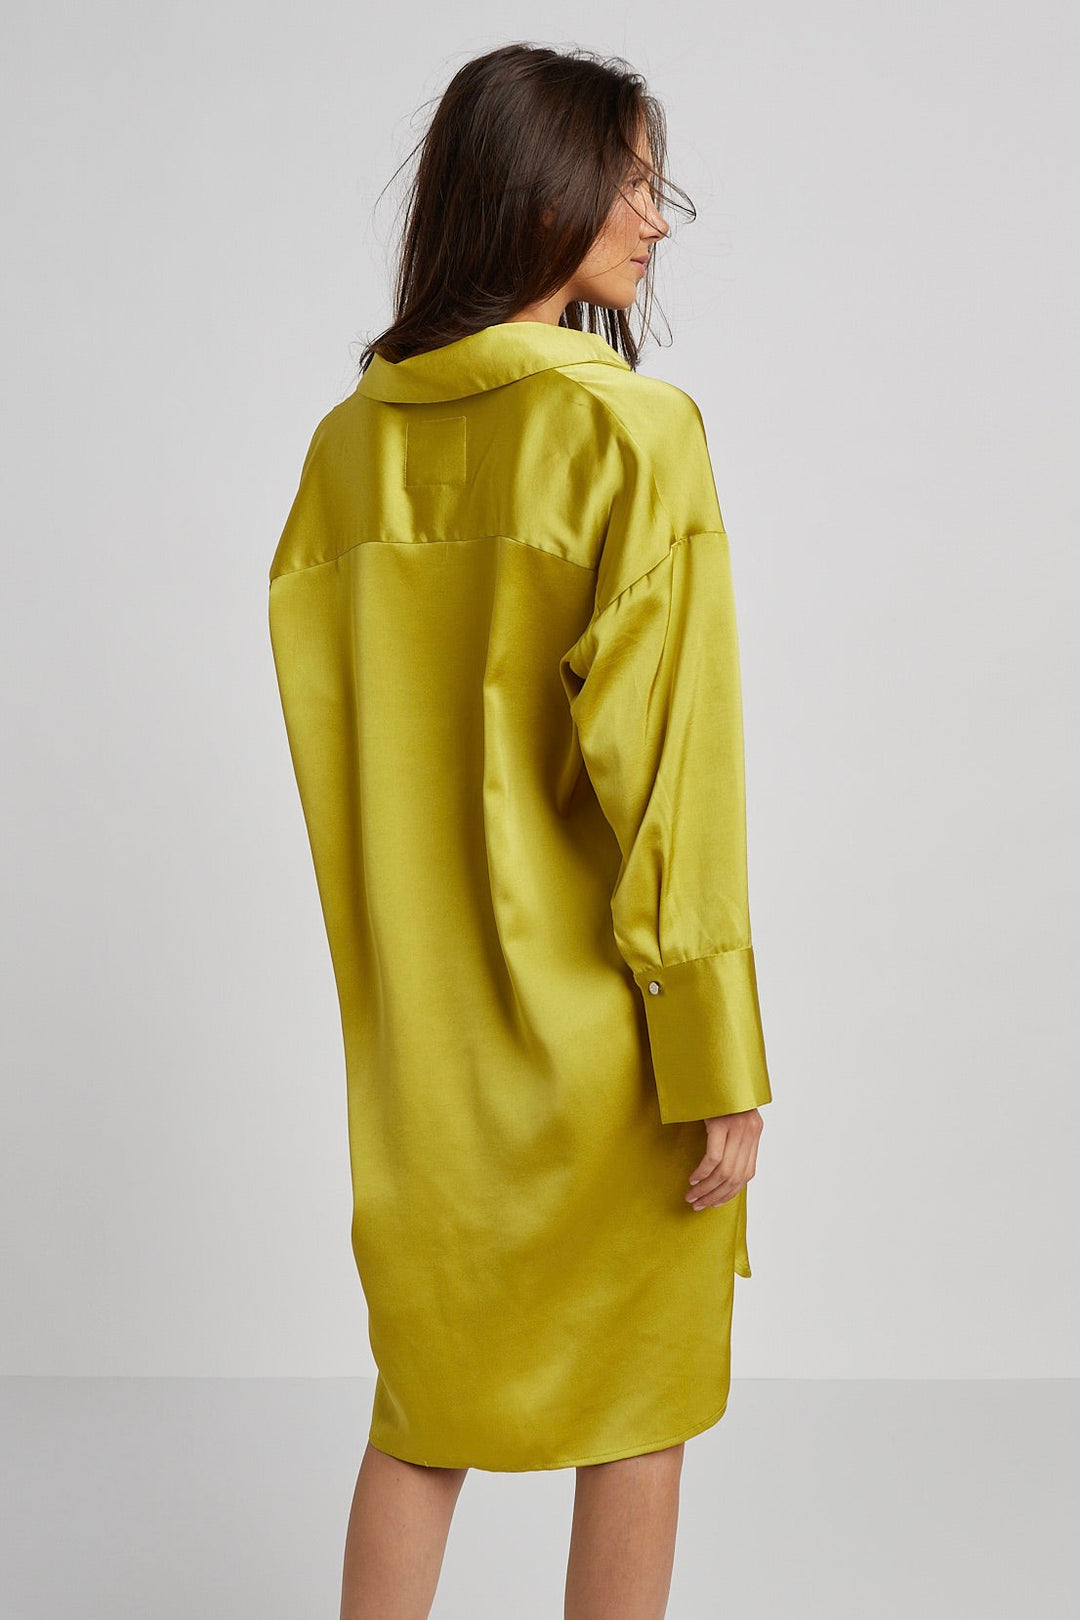 Adroit Atelier Kyoko Pullover Dress - Chartreuse